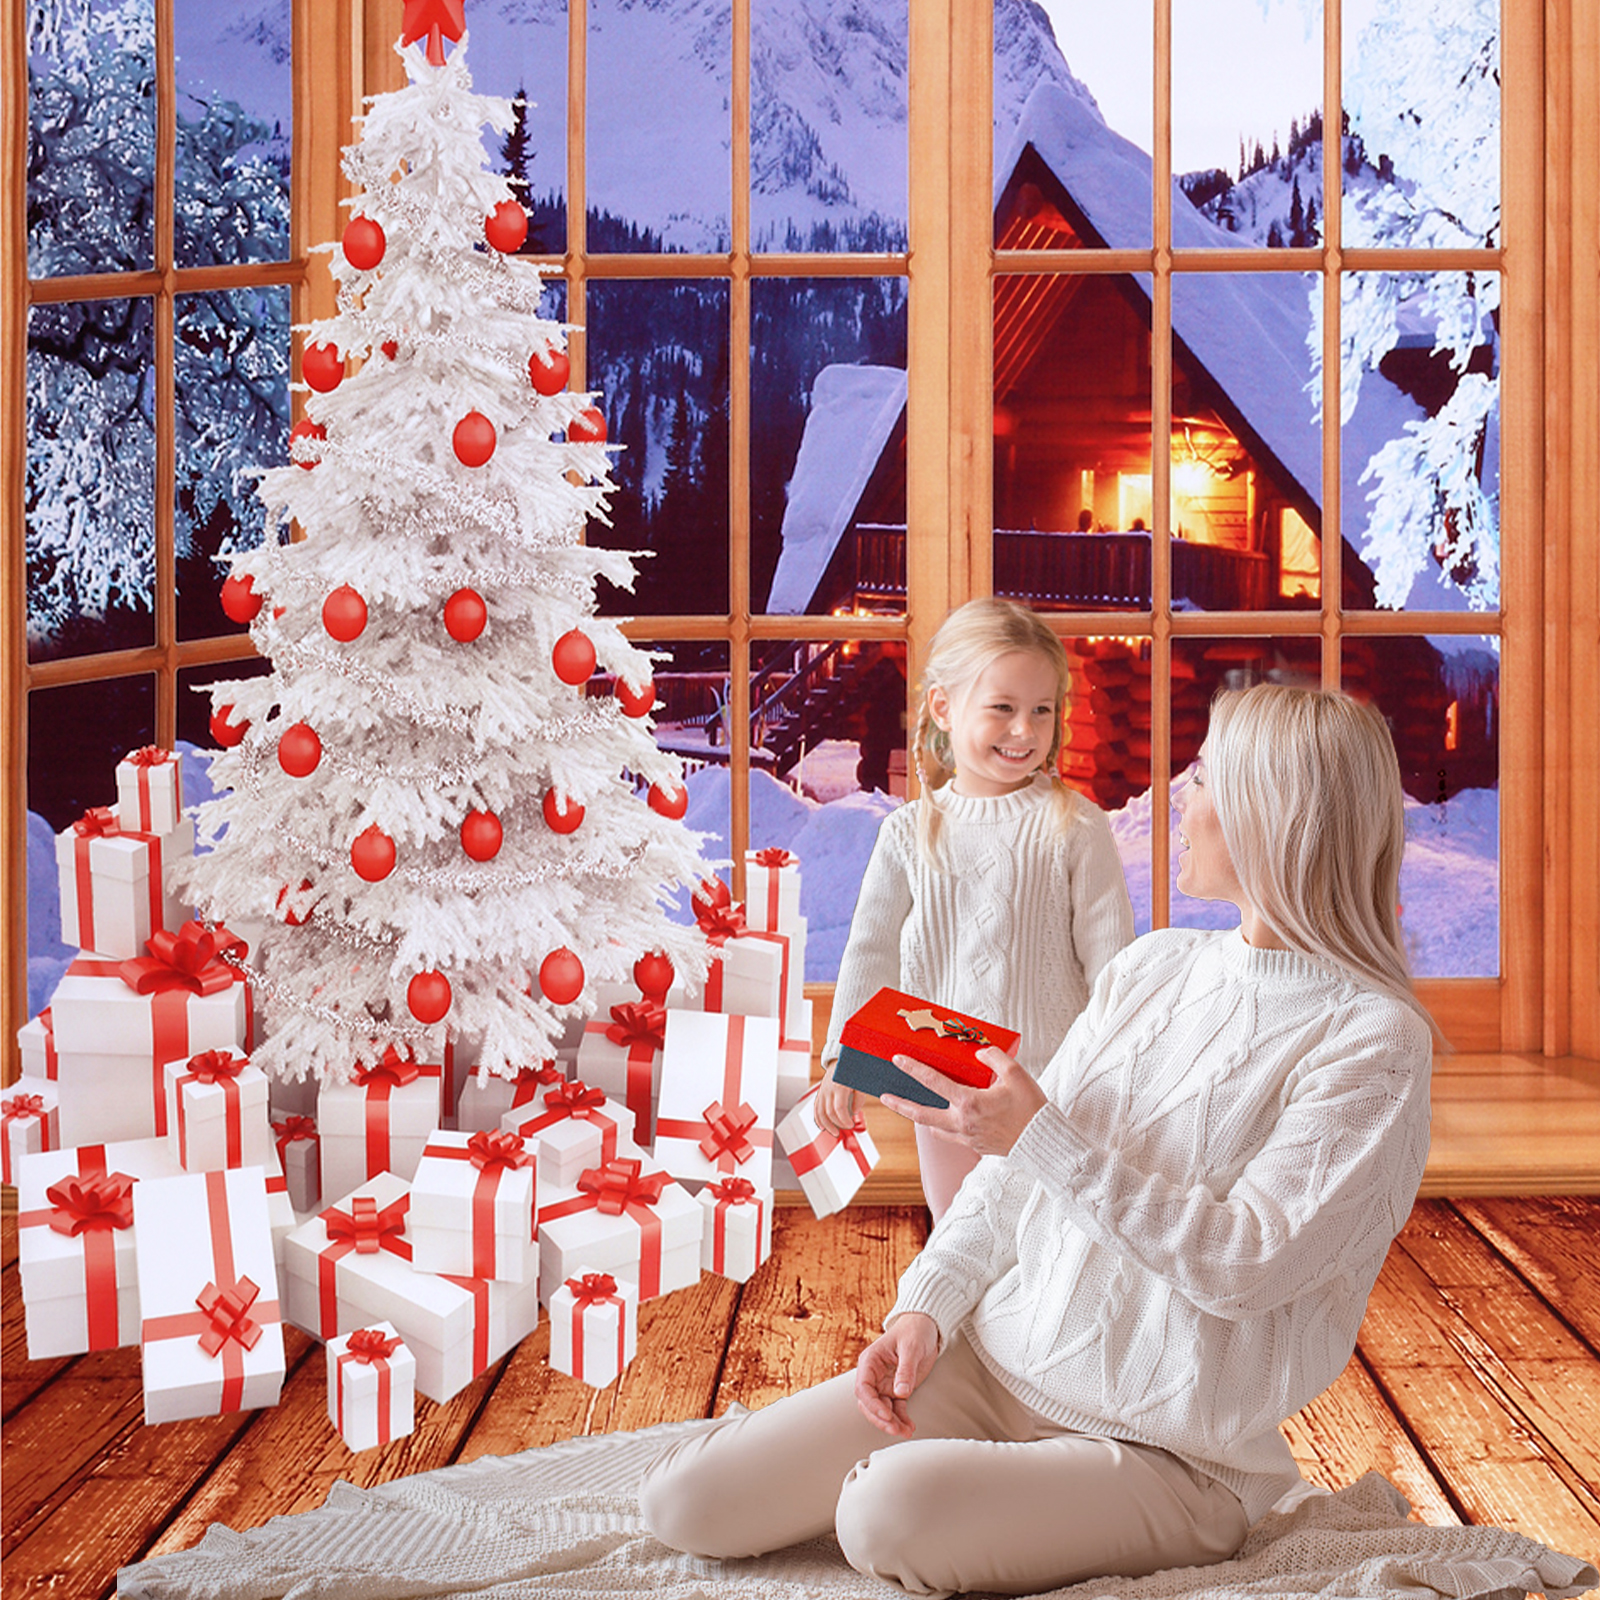 Mohoo-5x7ft-15x21m-Christmas-Backdrop-Photo-Window-Backdrop-with-Wooden-Floor-Christmas-Tree-Snow-Co-1958159-2